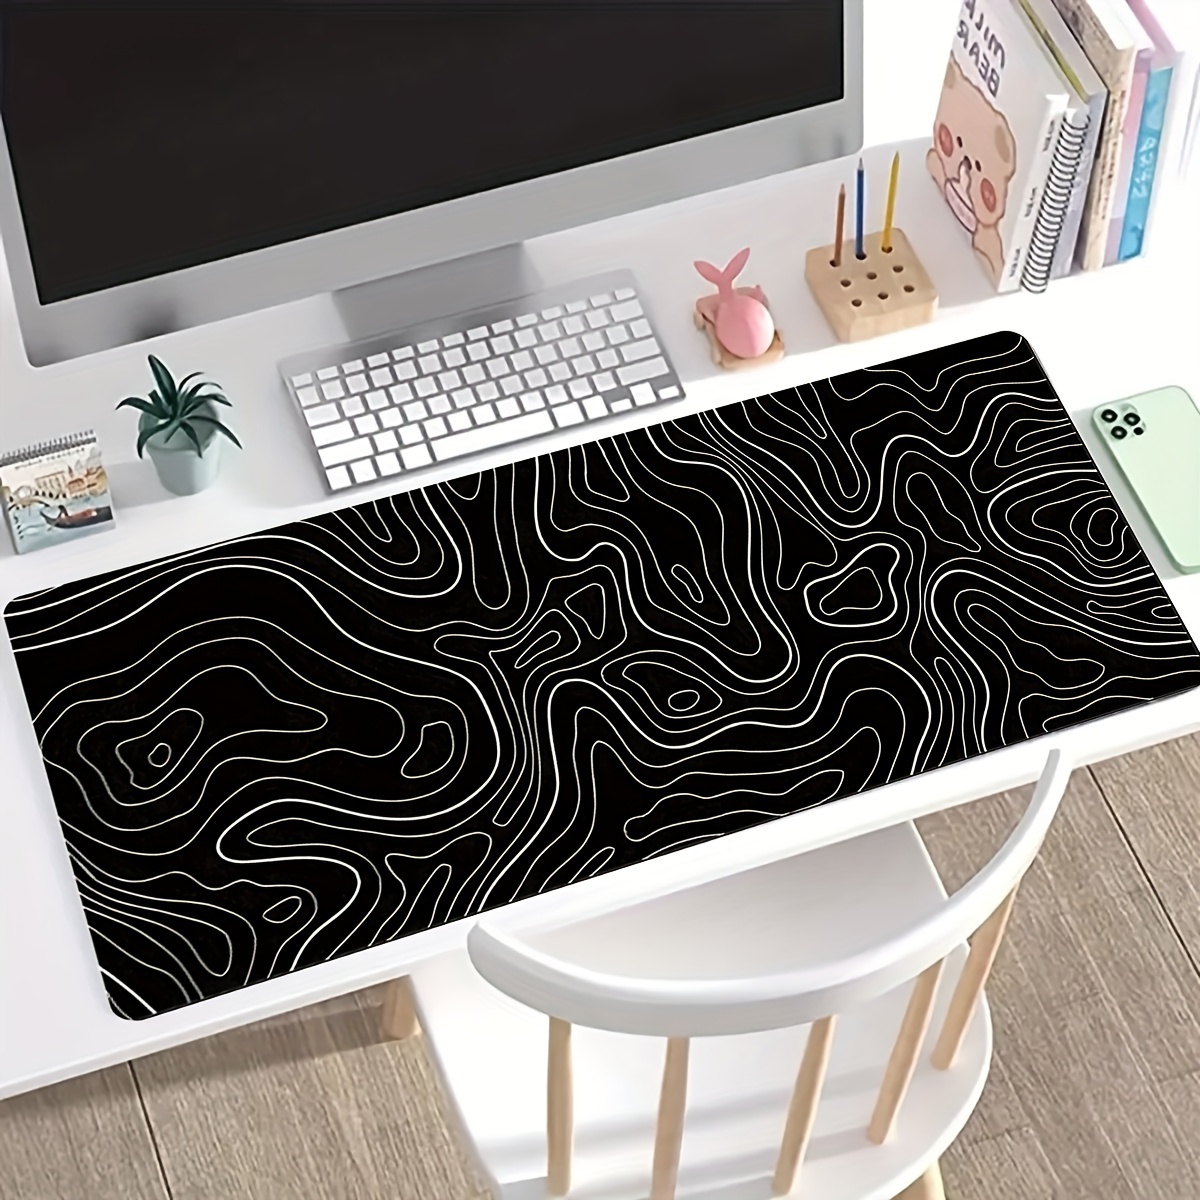 

31.5x11.8inch Gaming Mouse Pad Large Keyboard Pad Topographic Mouse Pad Black And White Mouse Pad For Keyboard With Anti-slip Rubber Base, Extended Desk Pad Xl Keyboard Pad Mouse Mat